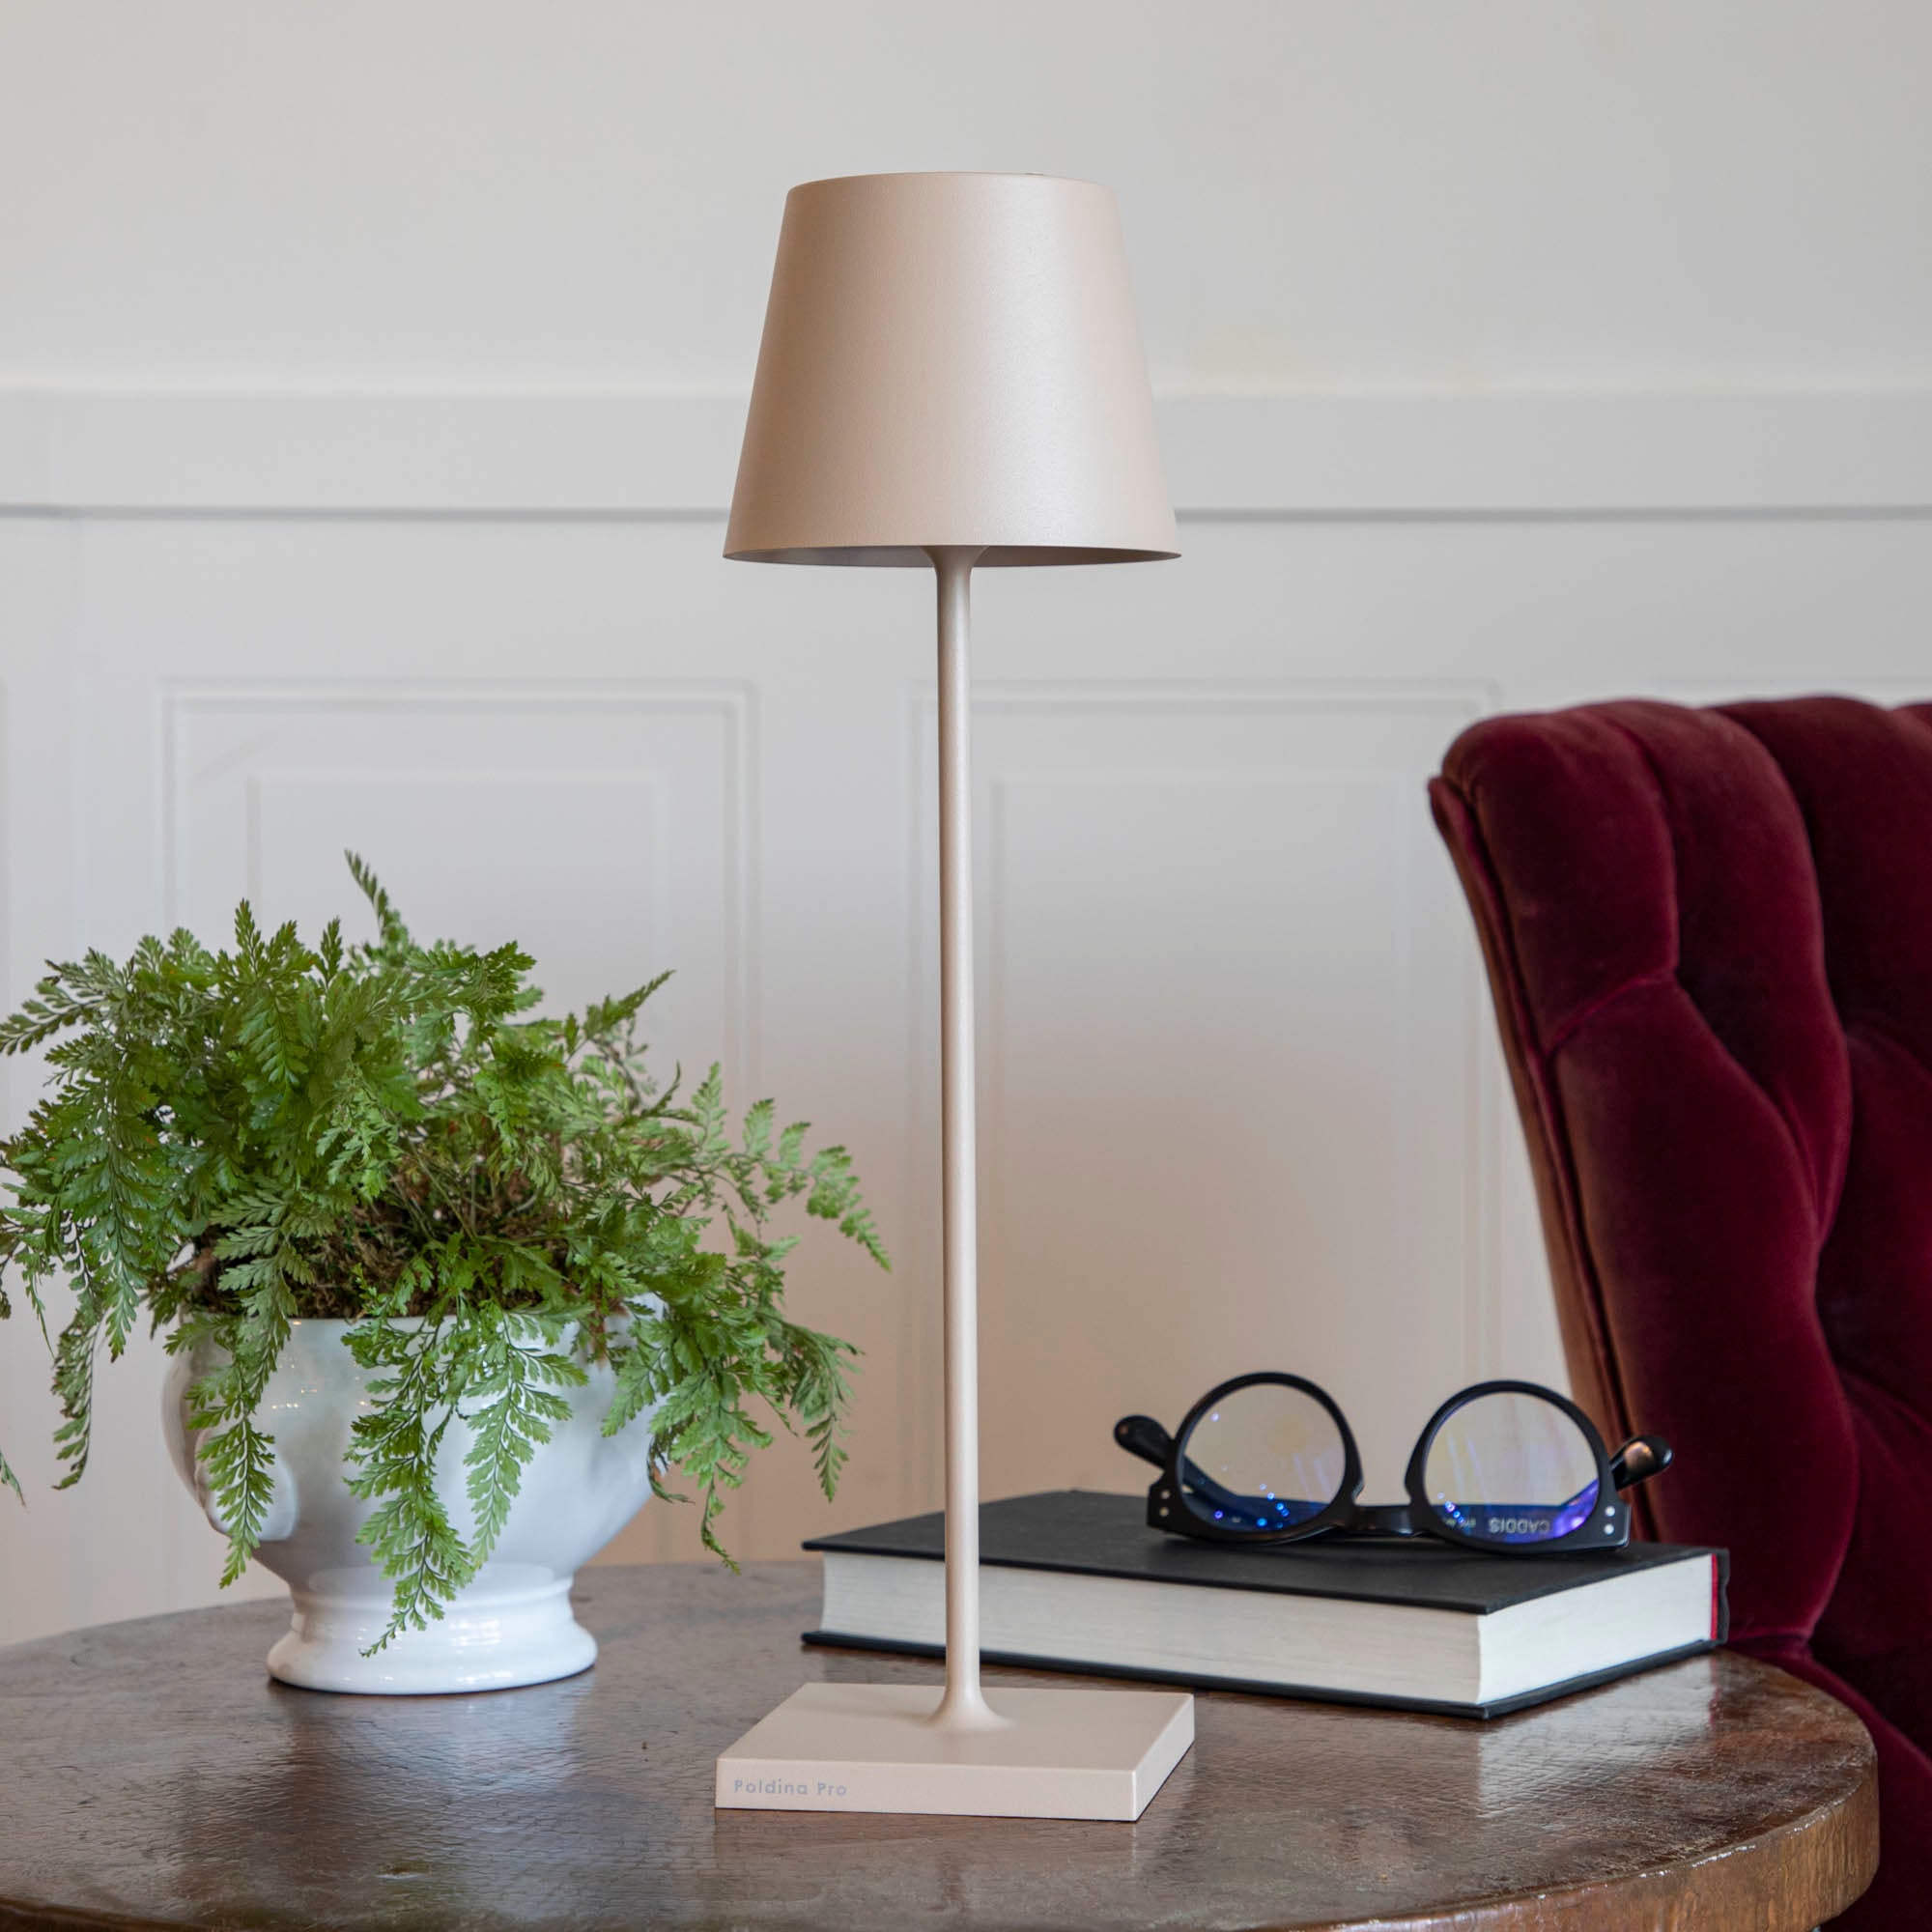 A Sand Cordless Lamp by Zafferano on a table.